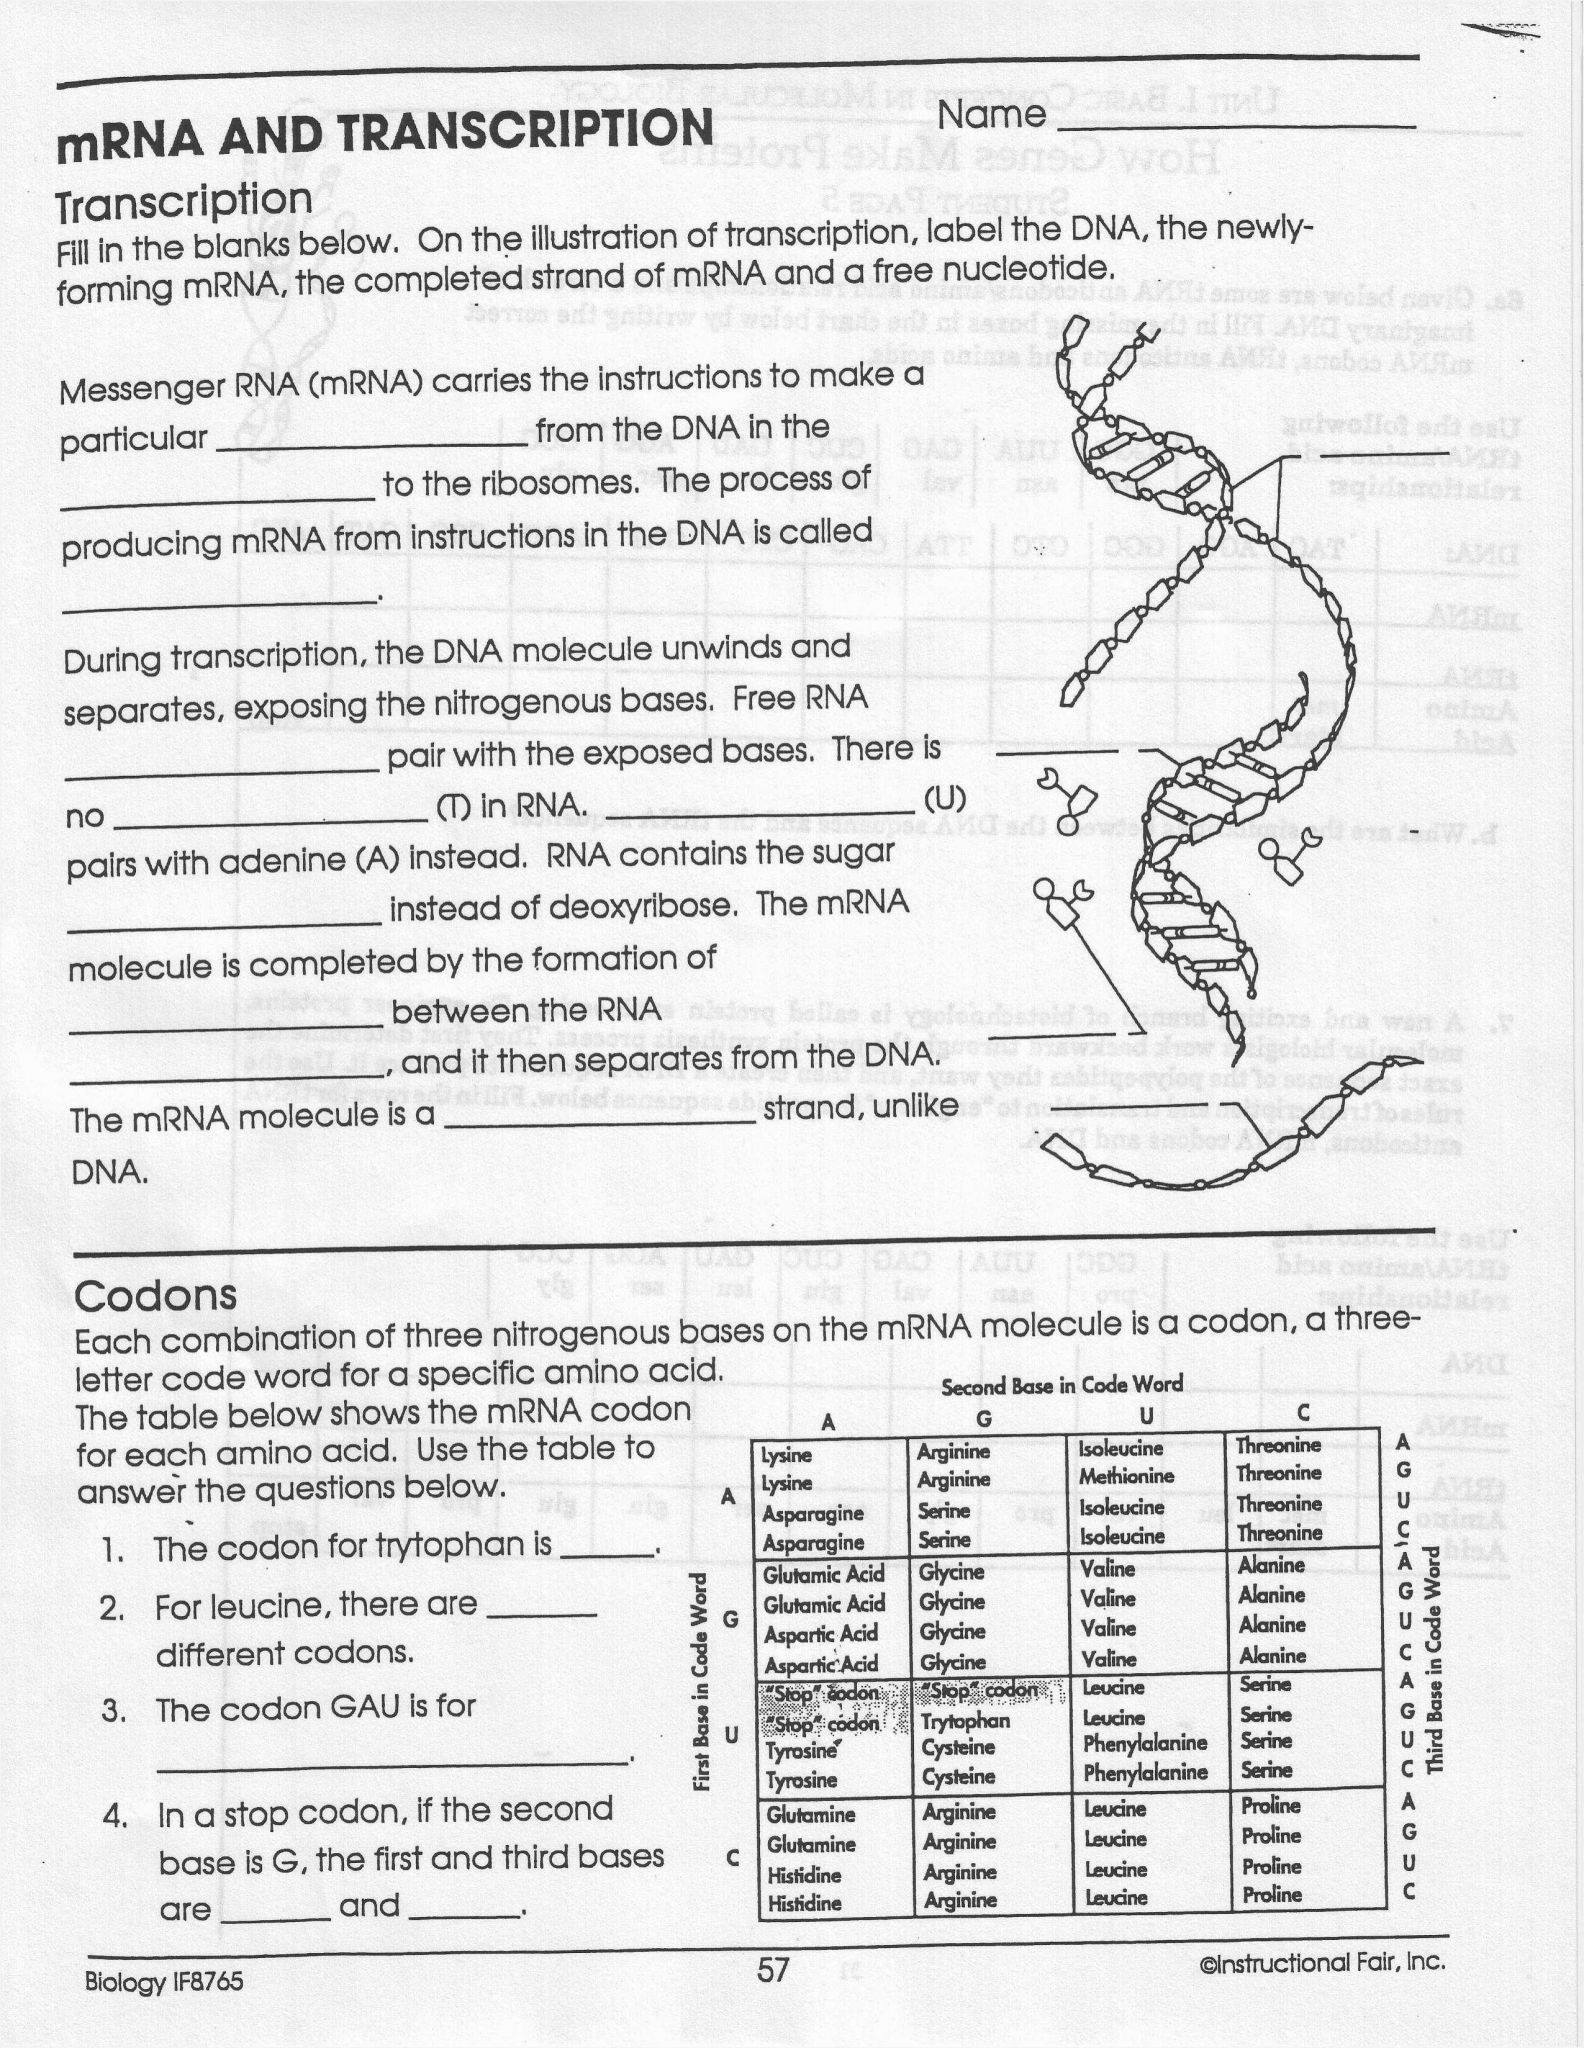 Dna Replication Worksheet Answers Mrna and Transcription Worksheet Answers In 2020